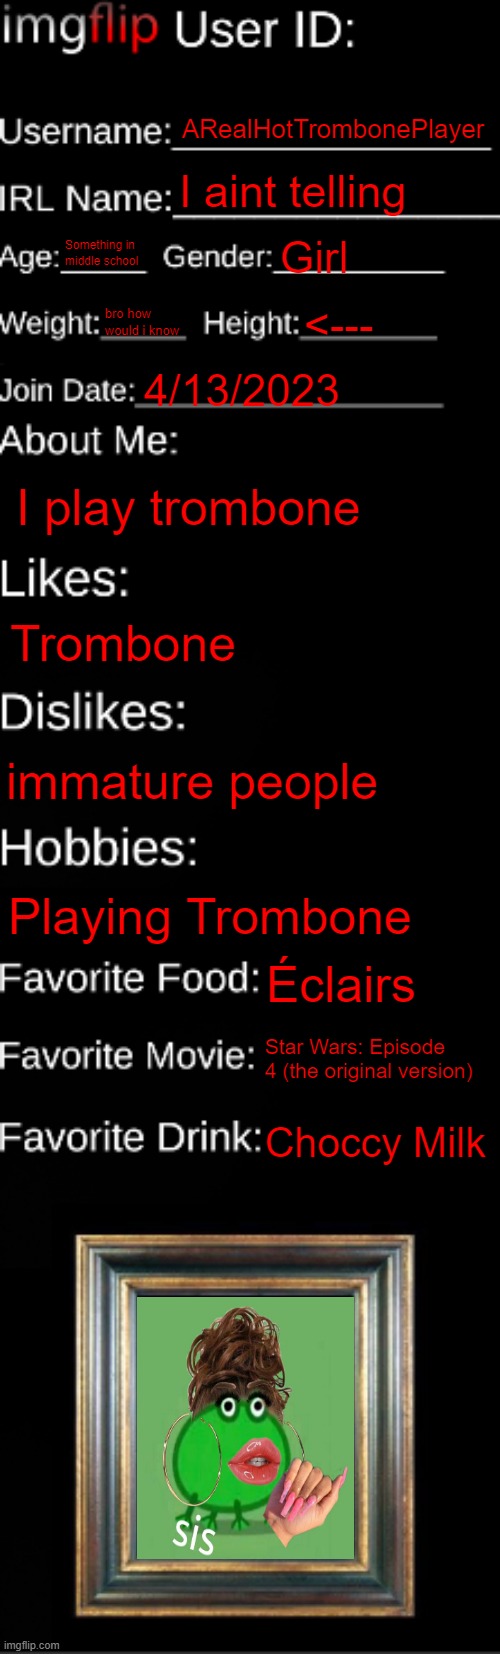 About Me | ARealHotTrombonePlayer; I aint telling; Something in middle school; Girl; bro how would i know; <---; 4/13/2023; I play trombone; Trombone; immature people; Playing Trombone; Éclairs; Star Wars: Episode 4 (the original version); Choccy Milk | image tagged in imgflip id card | made w/ Imgflip meme maker